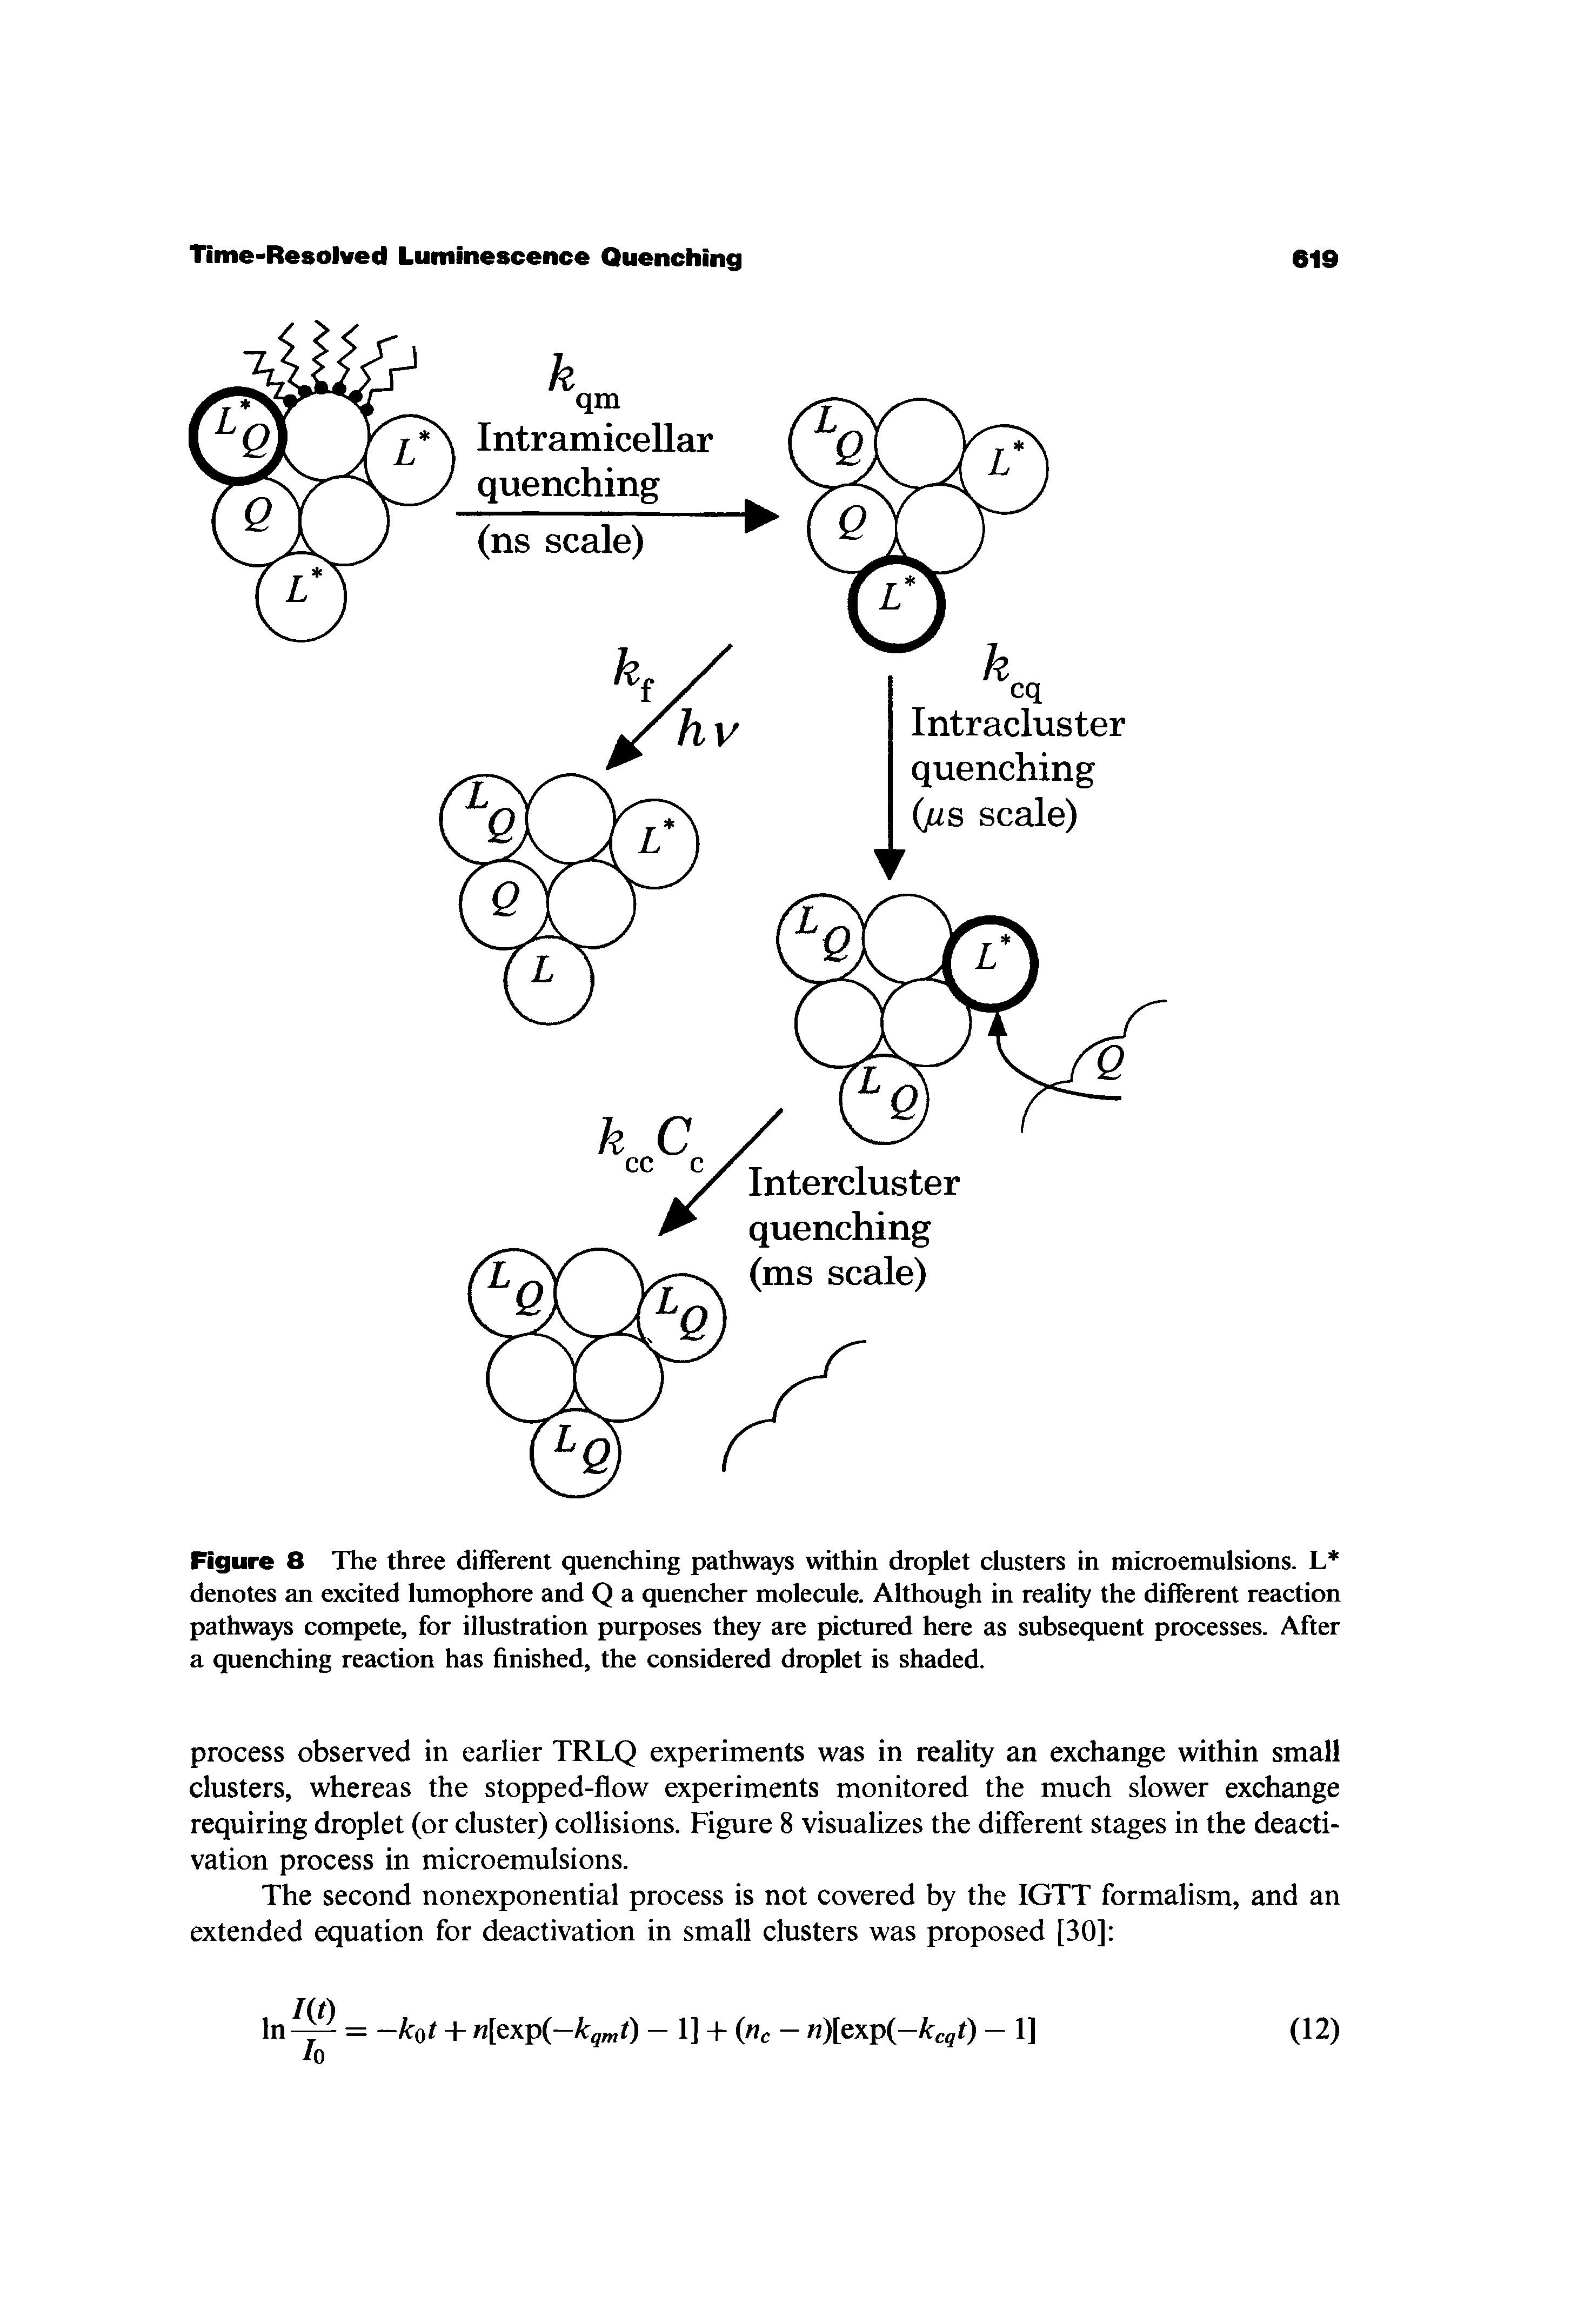 Figure 8 The three different quenching pathways within droplet clusters in microemulsions. L denotes an excited lumophore and Q a quencher molecule. Although in reality the different reaction pathways compete, for illustration purposes they are pictured here as subsequent processes. After a quenching reaction has finished, the considered droplet is shaded.